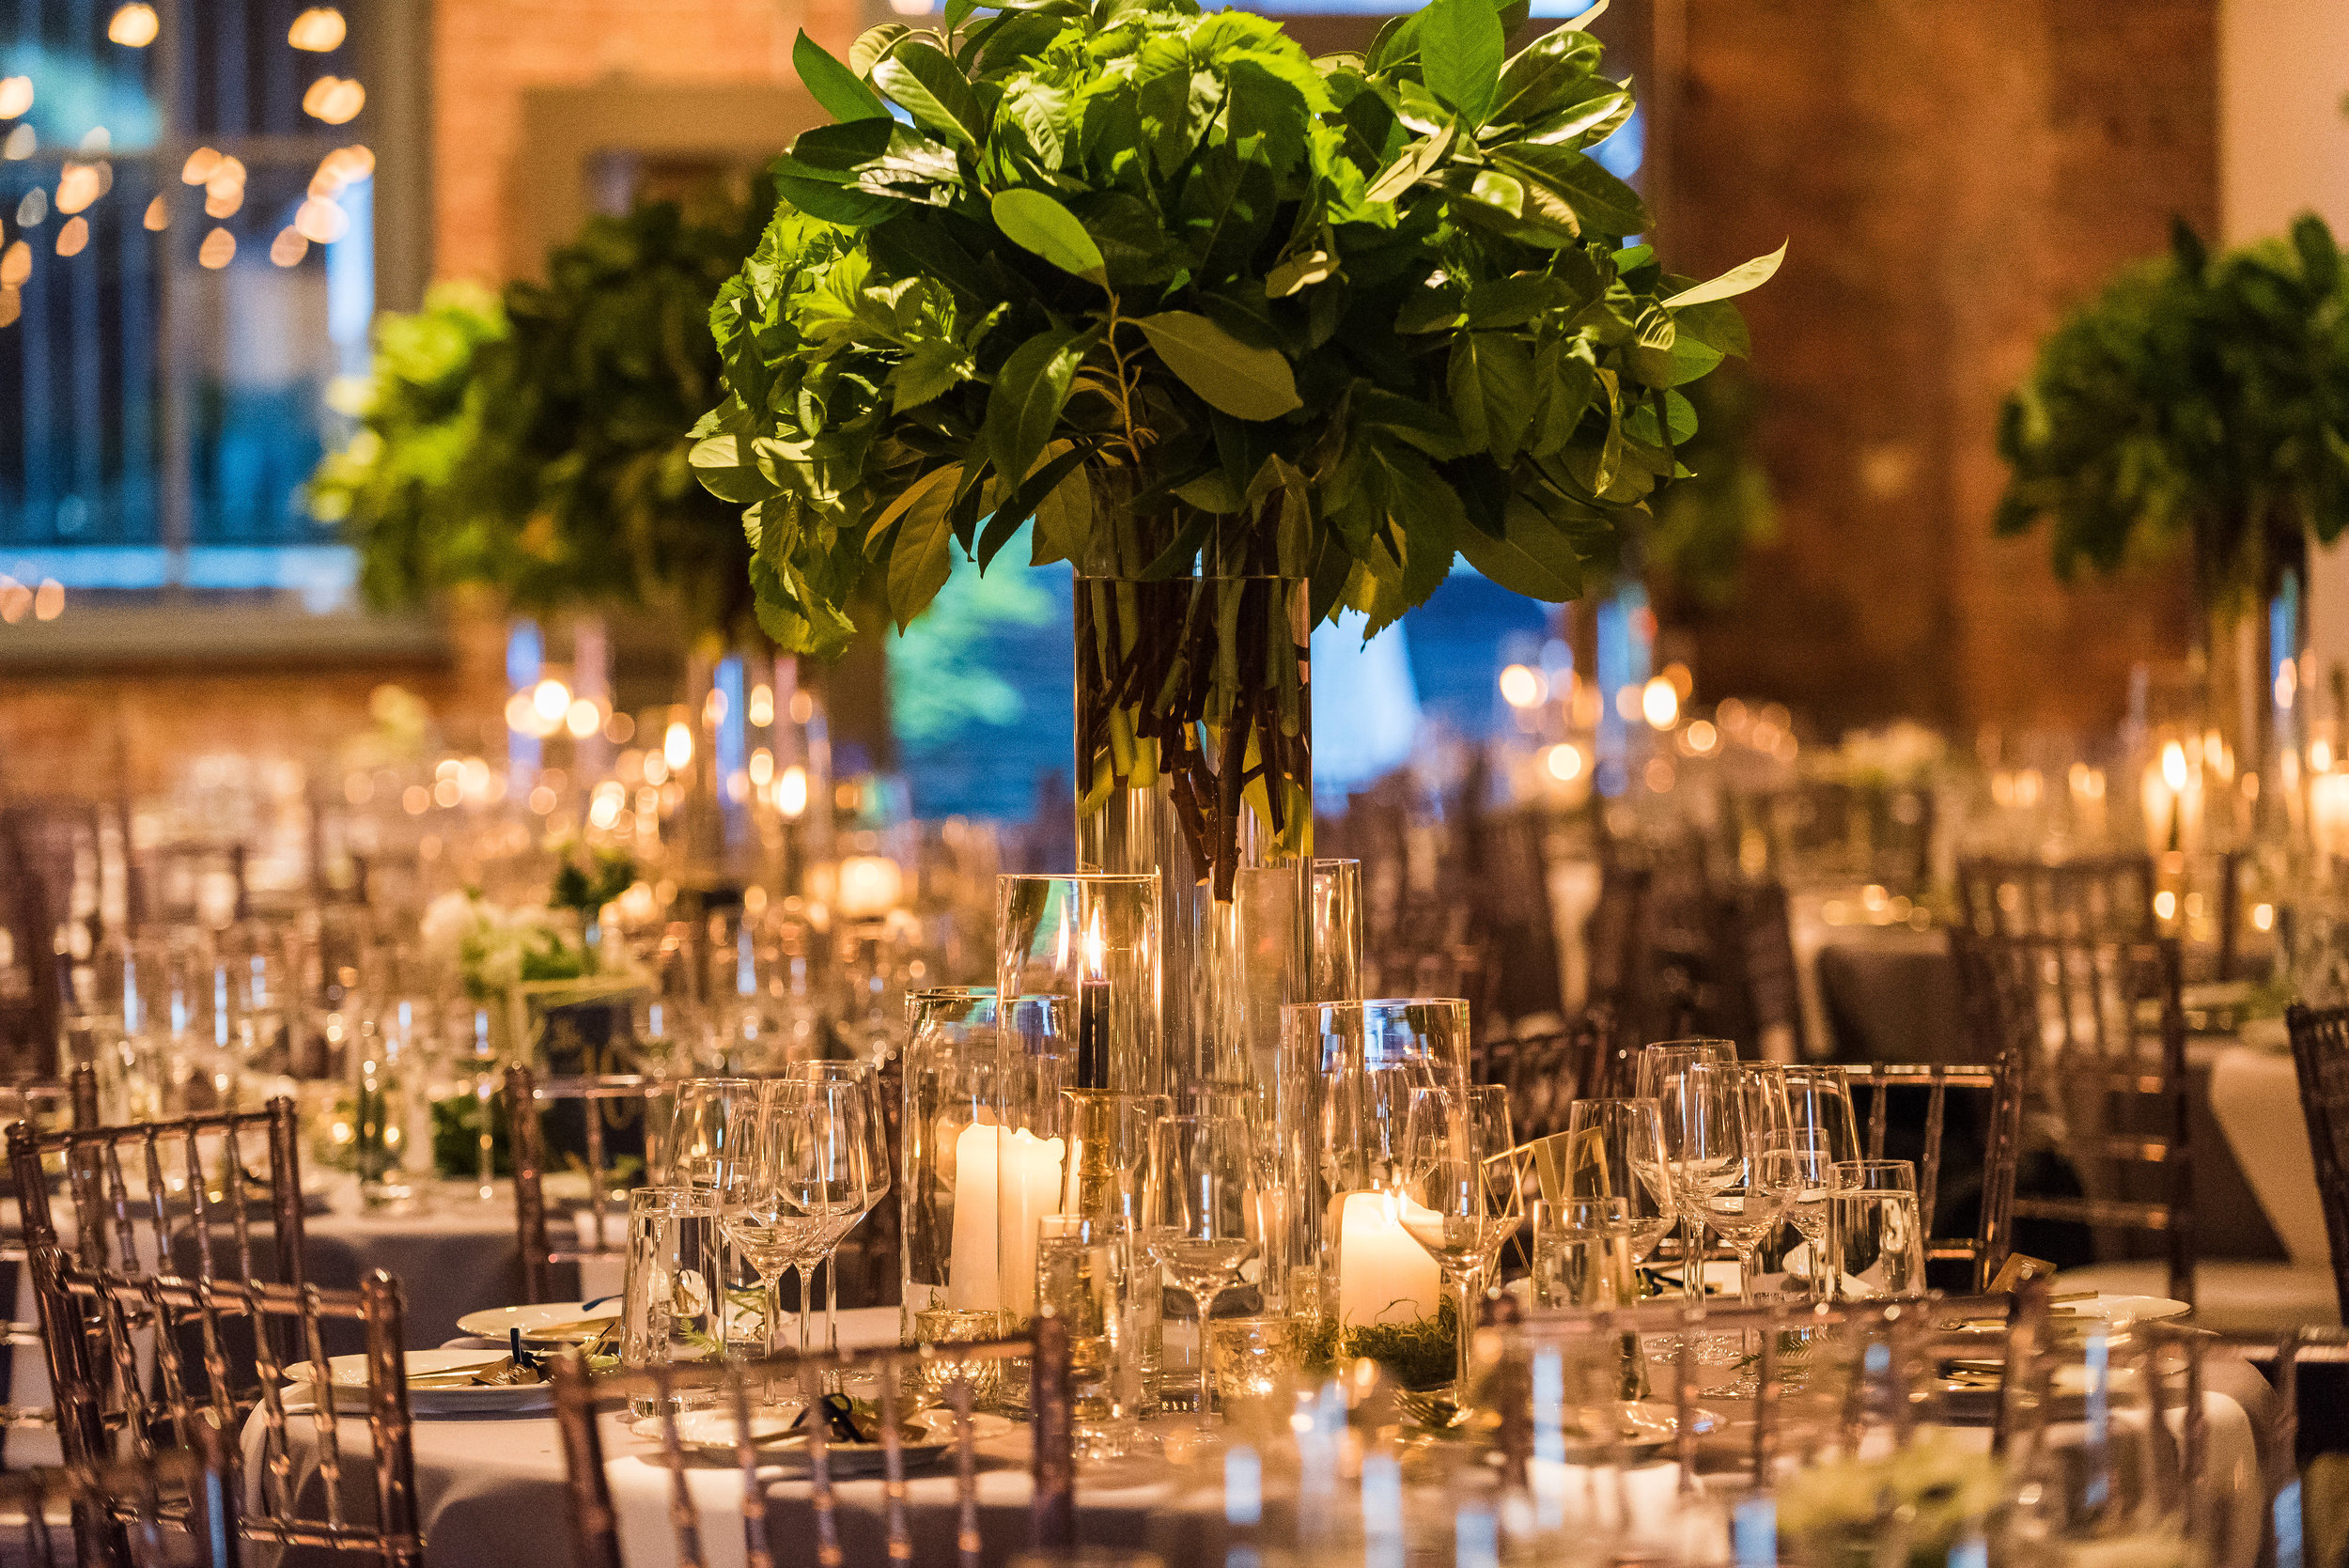 Candle and Greenery Wedding Centerpiece.jpg